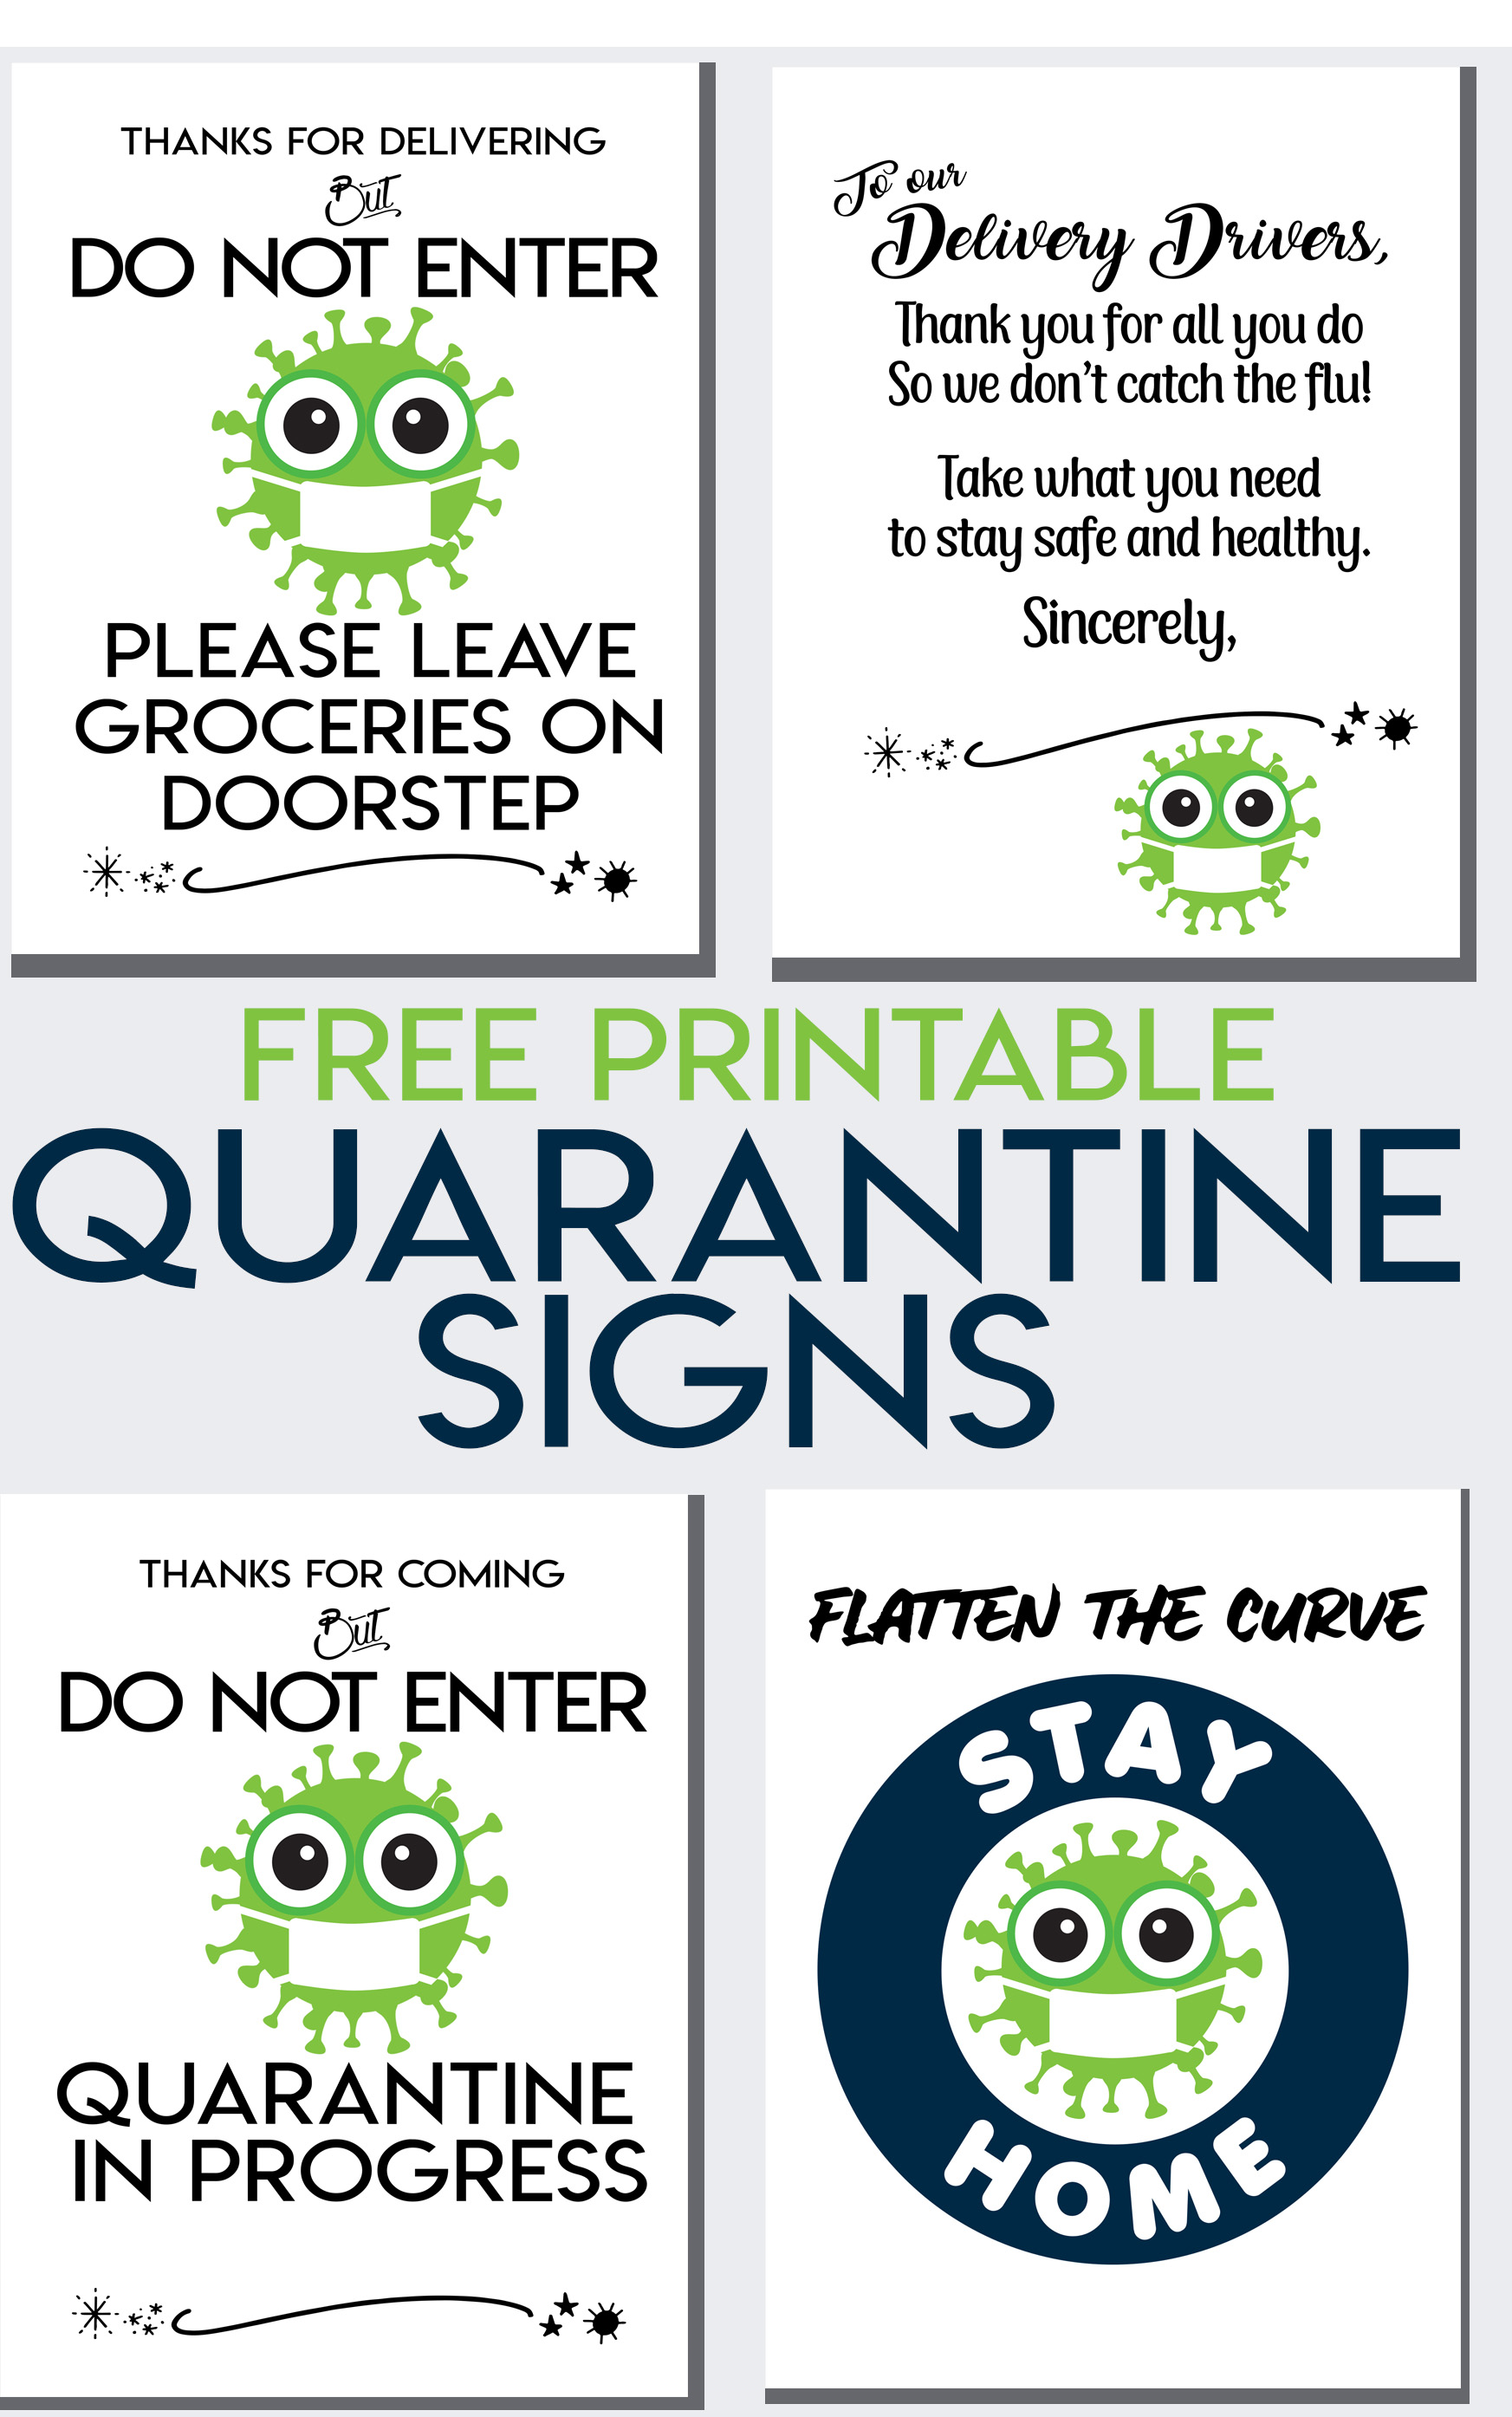 Thank your Delivery Drivers {Free Printable Quarantine Signs} Beth Bryan